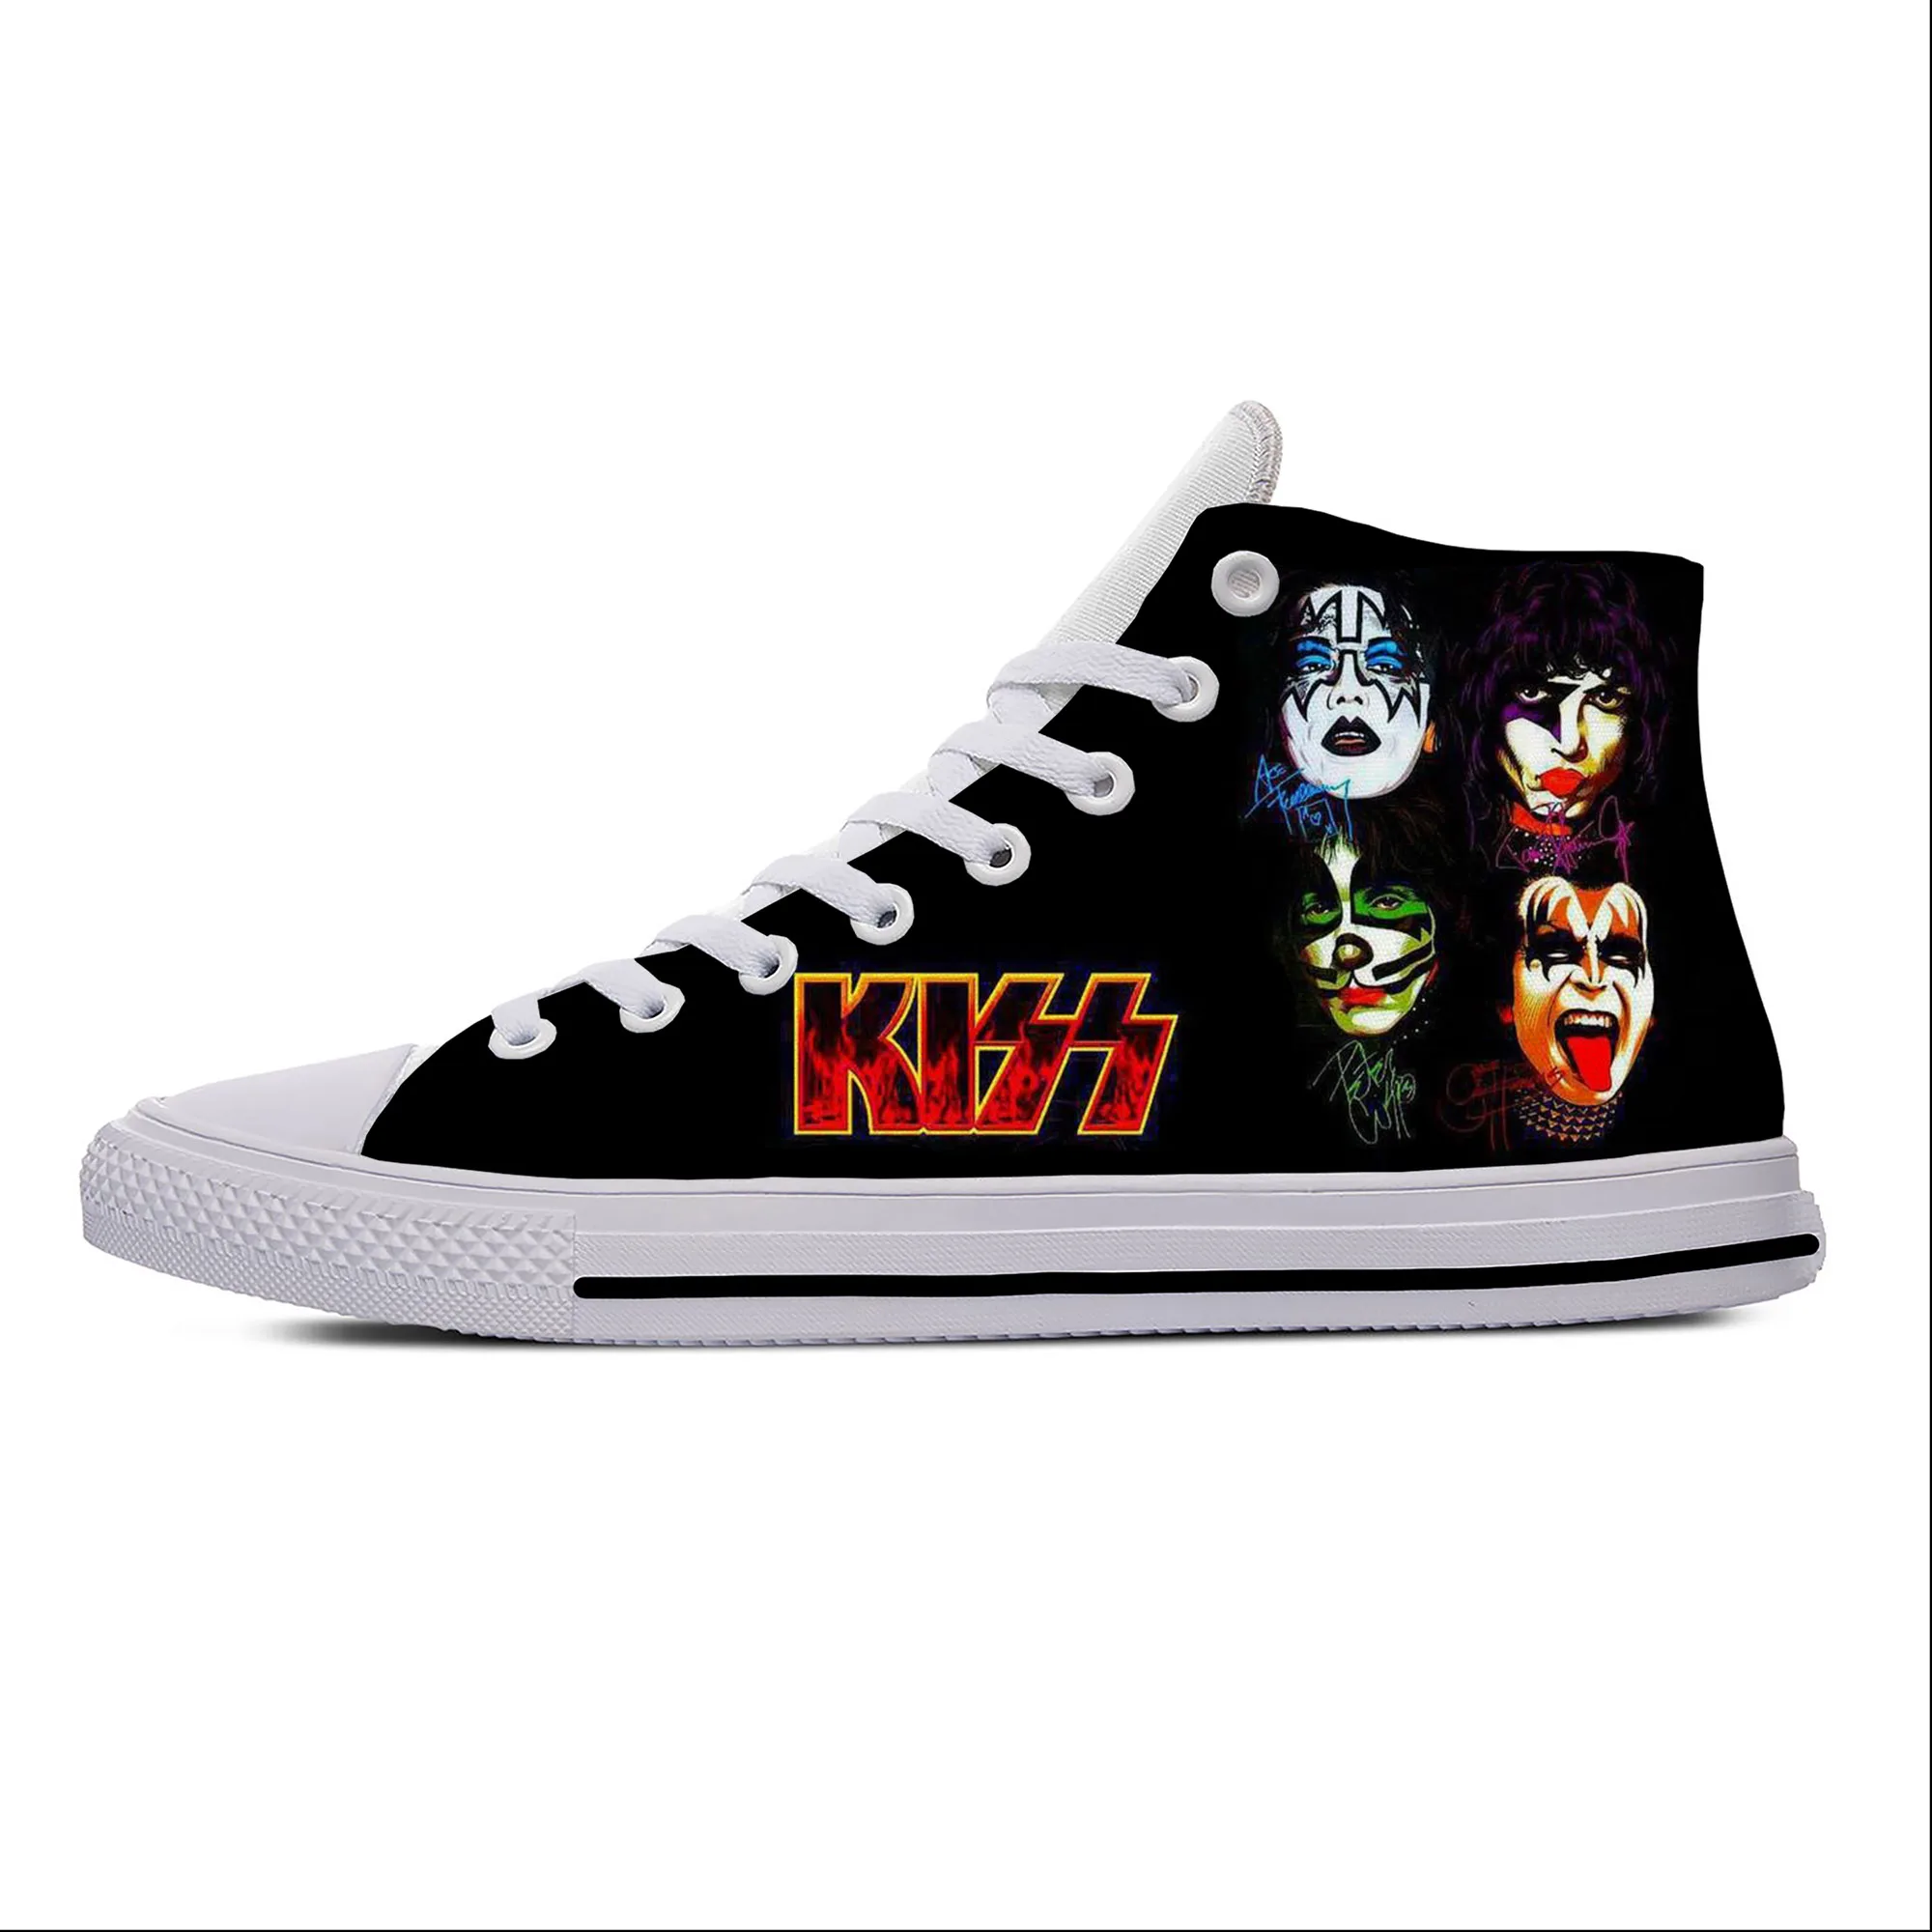 Heavy Metal Rock Band Kiss Music Fashion Funny Casual Cloth Shoes High Top Lightweight Breathable 3D Print Men Women Sneakers cloocl 2021 newest hip hop rock metal kiss band 3d print pants unisex fashion casual all match sweatpants trousers